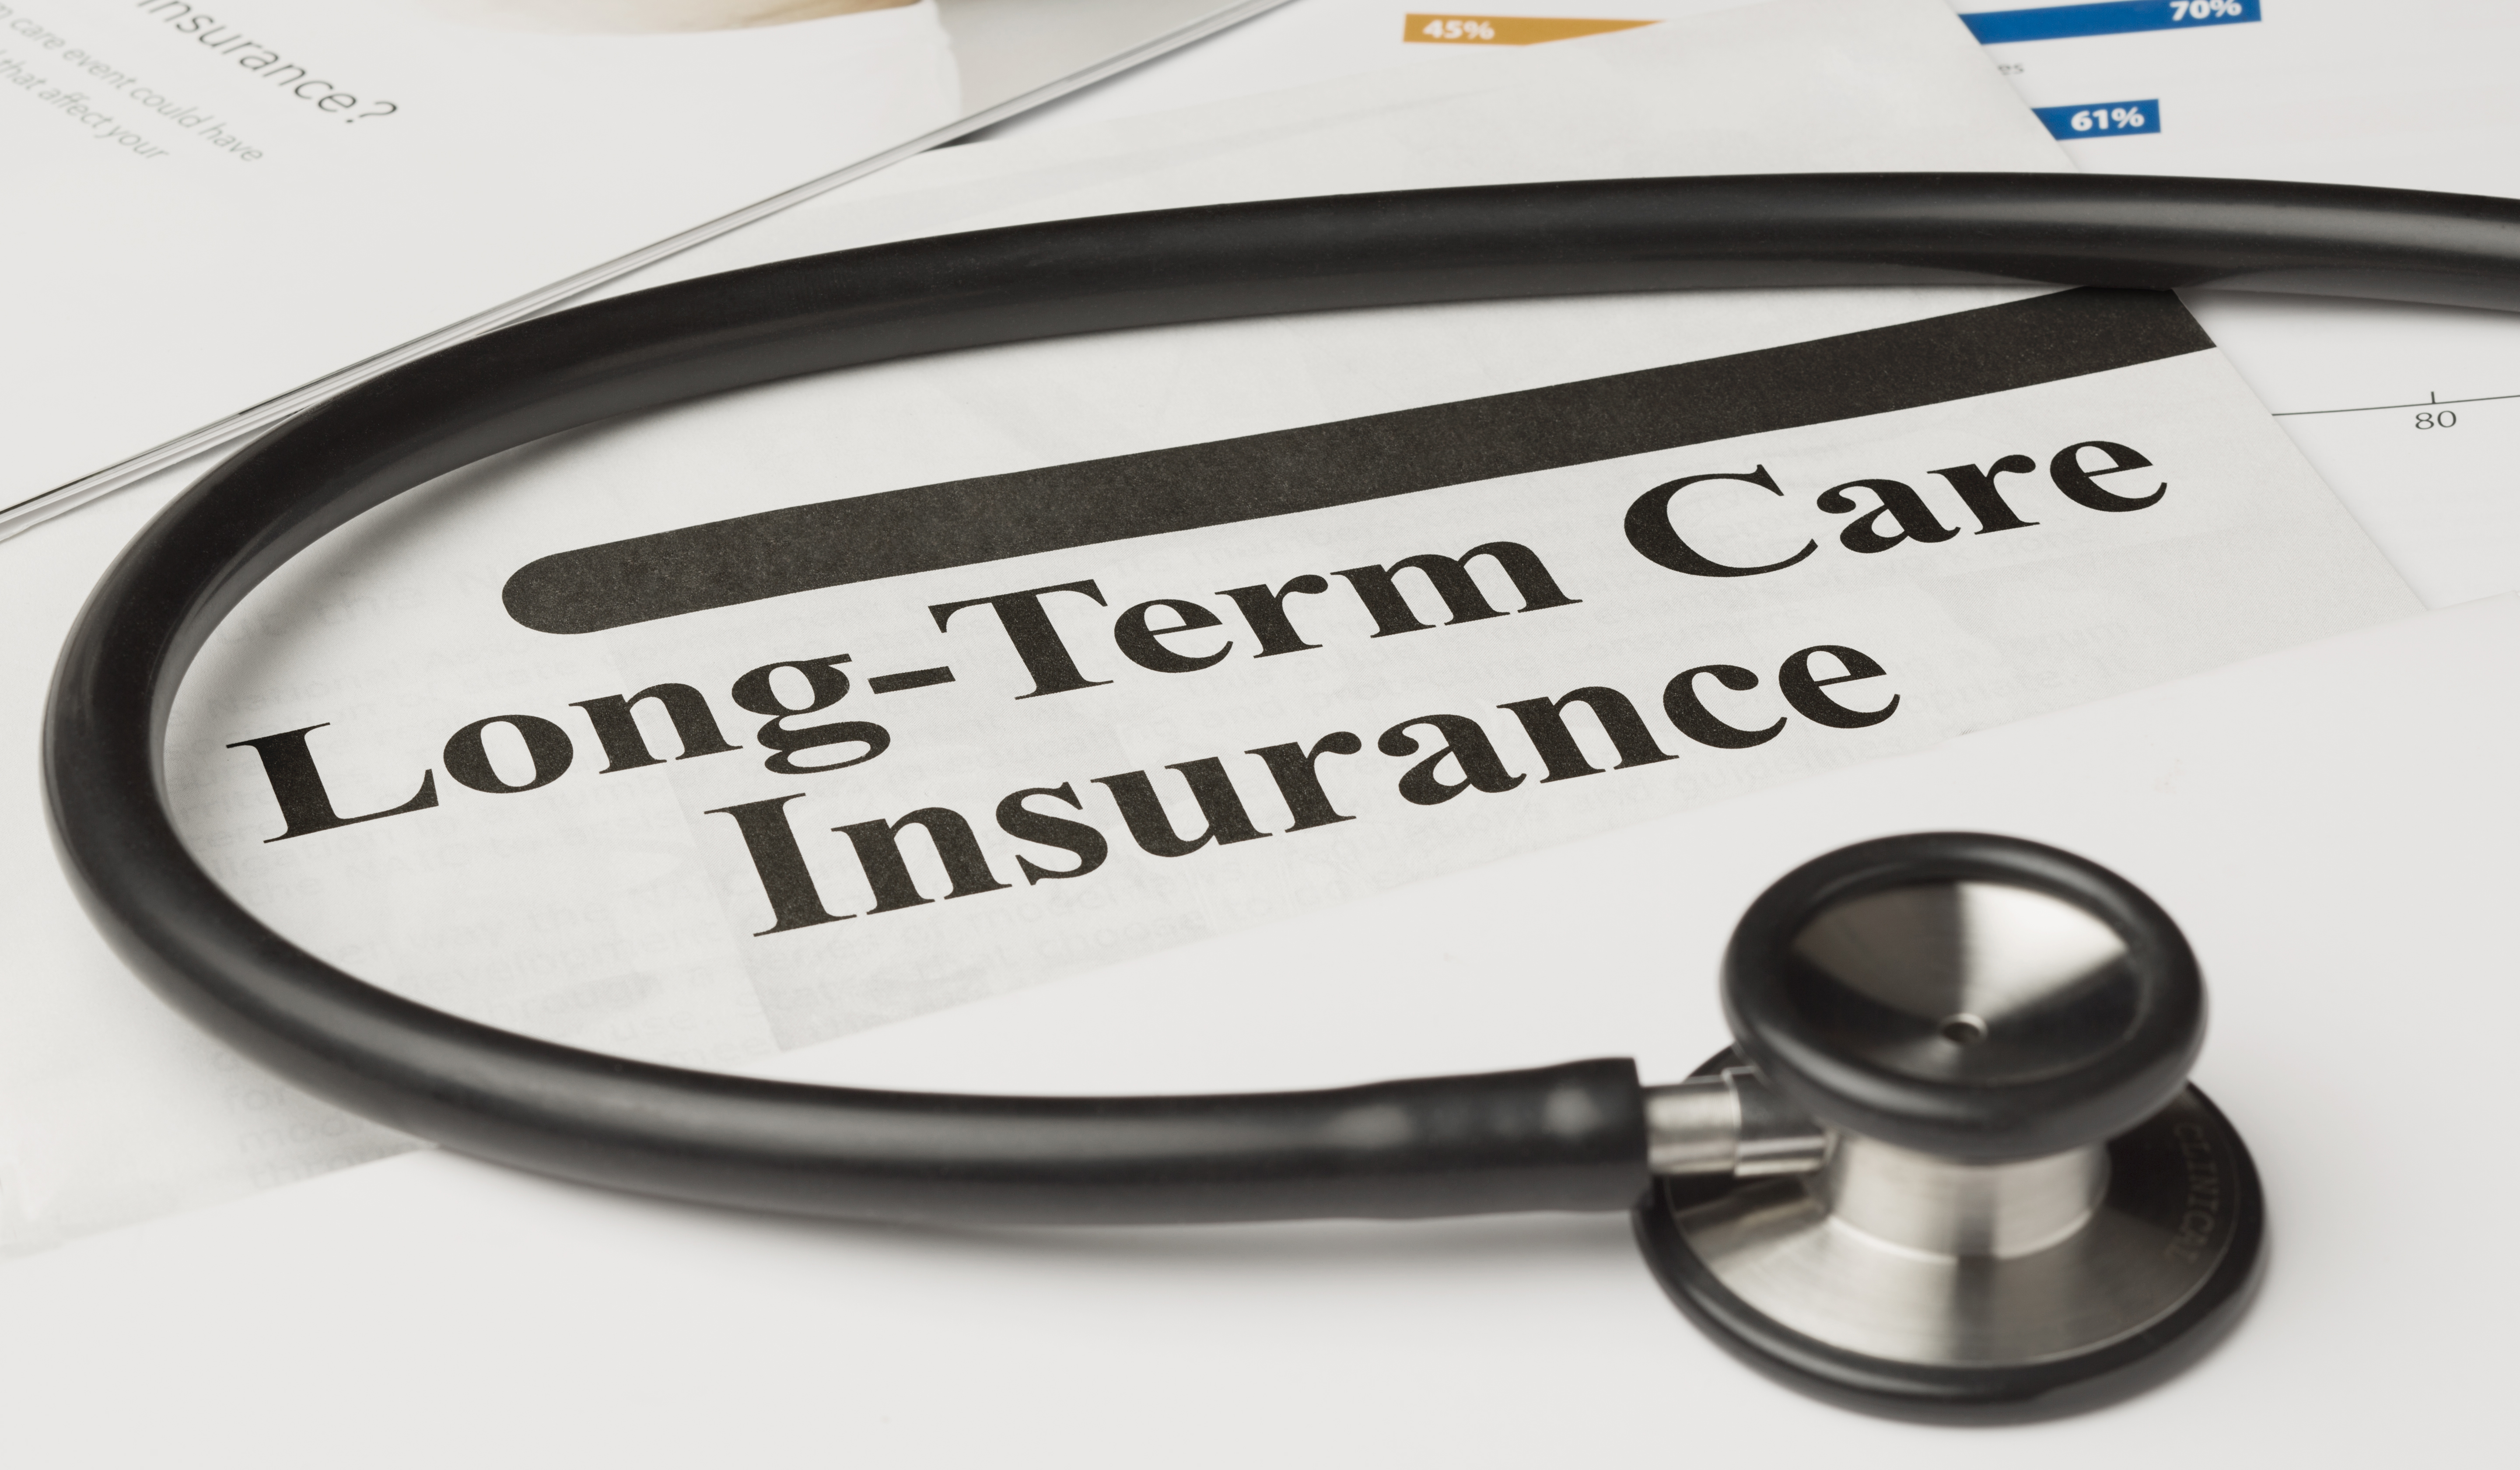 Long-term care insurance information, form and stethoscope.  